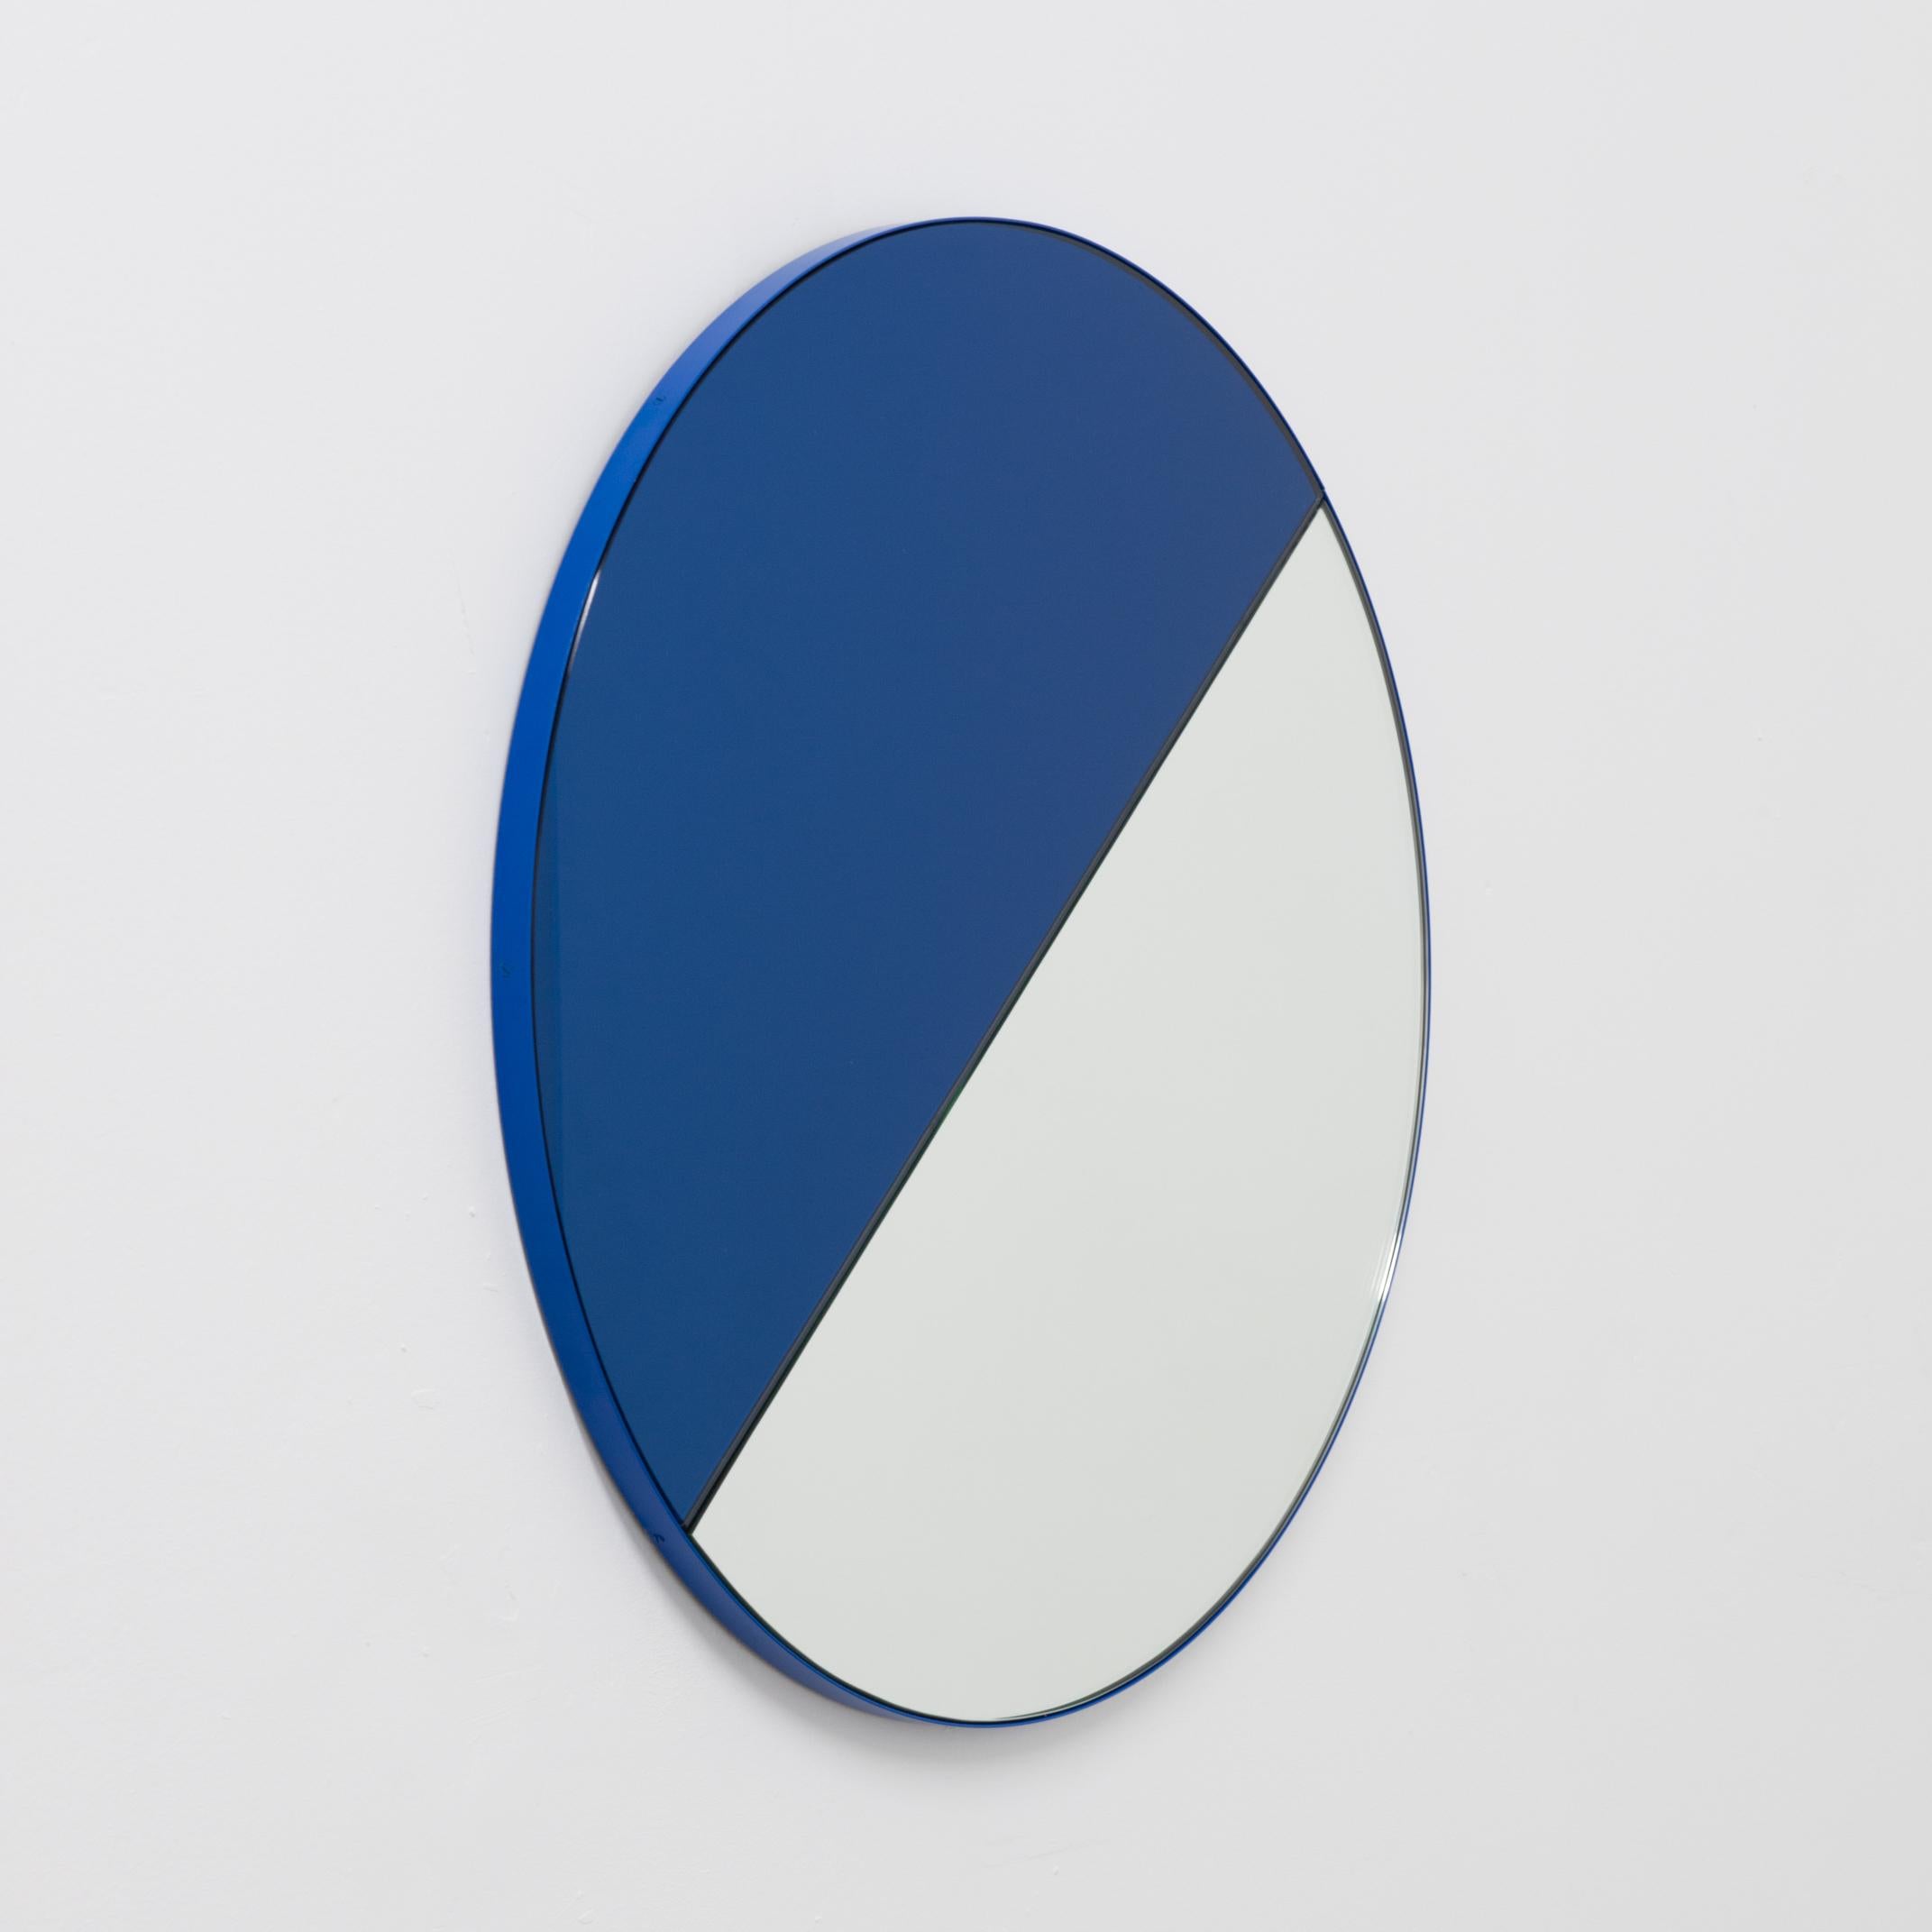 Orbis Dualis Mixed Blue Tinted Contemporary Round Mirror with Blue Frame, Small For Sale 1